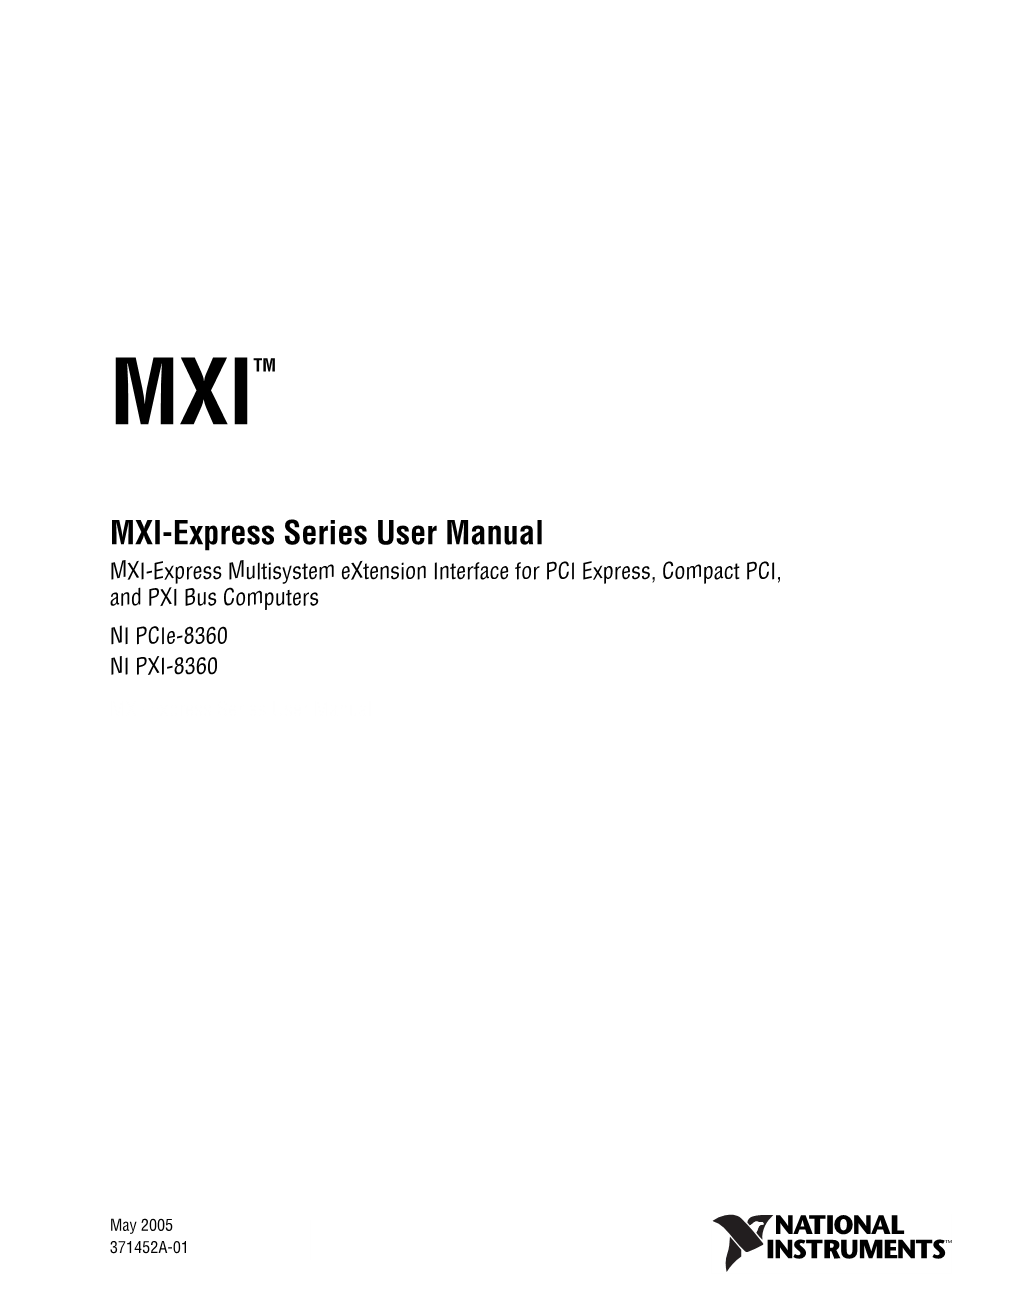 MXI-Express Series User Manual MXI-Express Multisystem Extension Interface for PCI Express, Compact PCI, and PXI Bus Computers NI Pcie-8360 NI PXI-8360